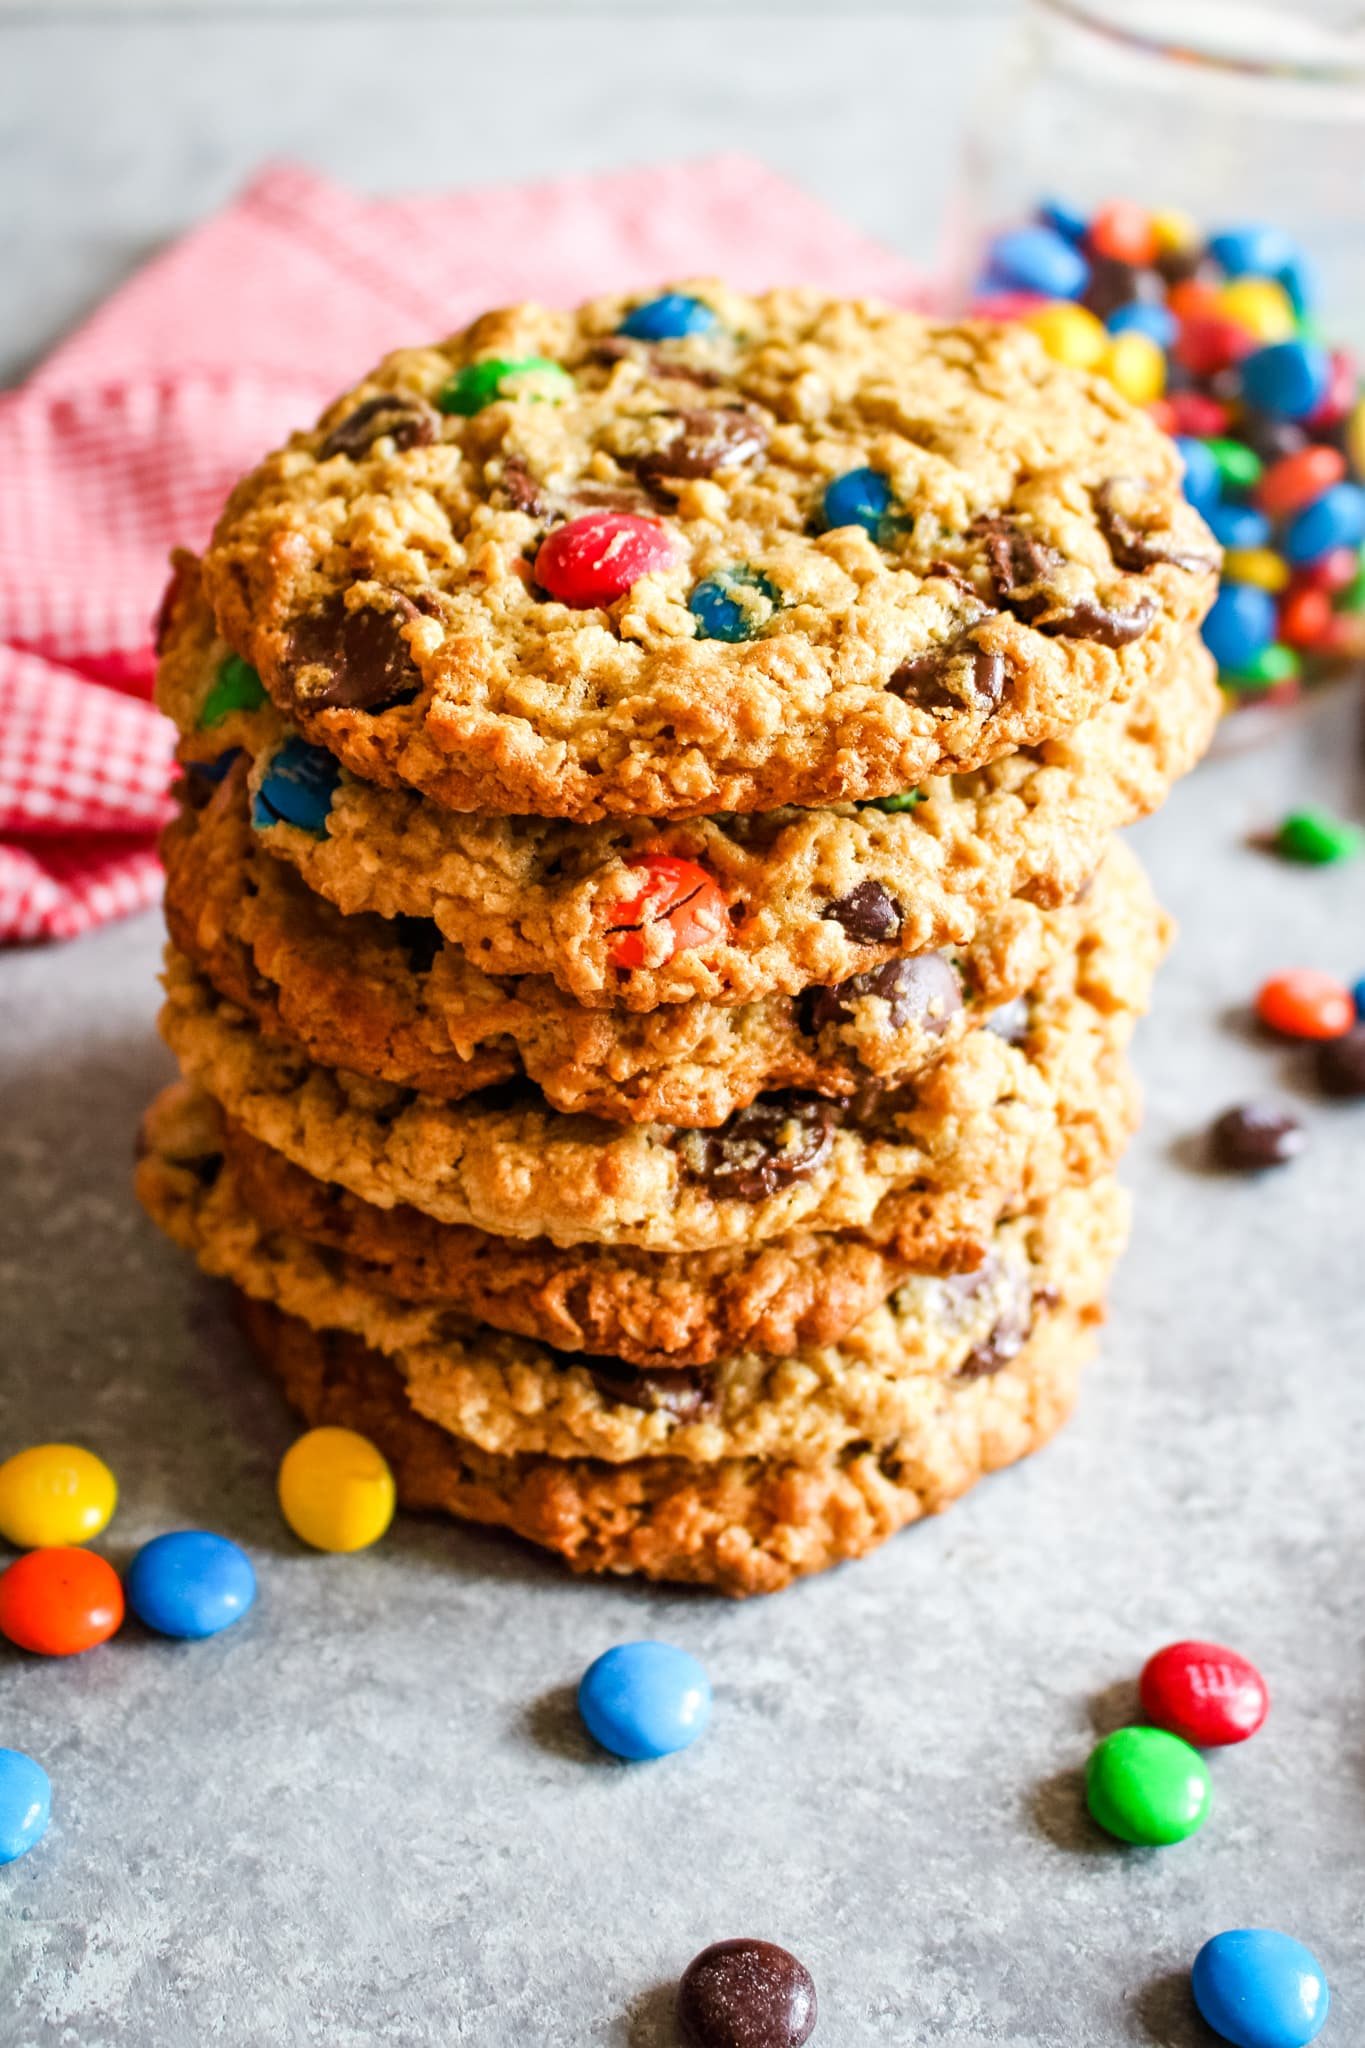 Large stack of monster cookies with M&M's in jar in background.